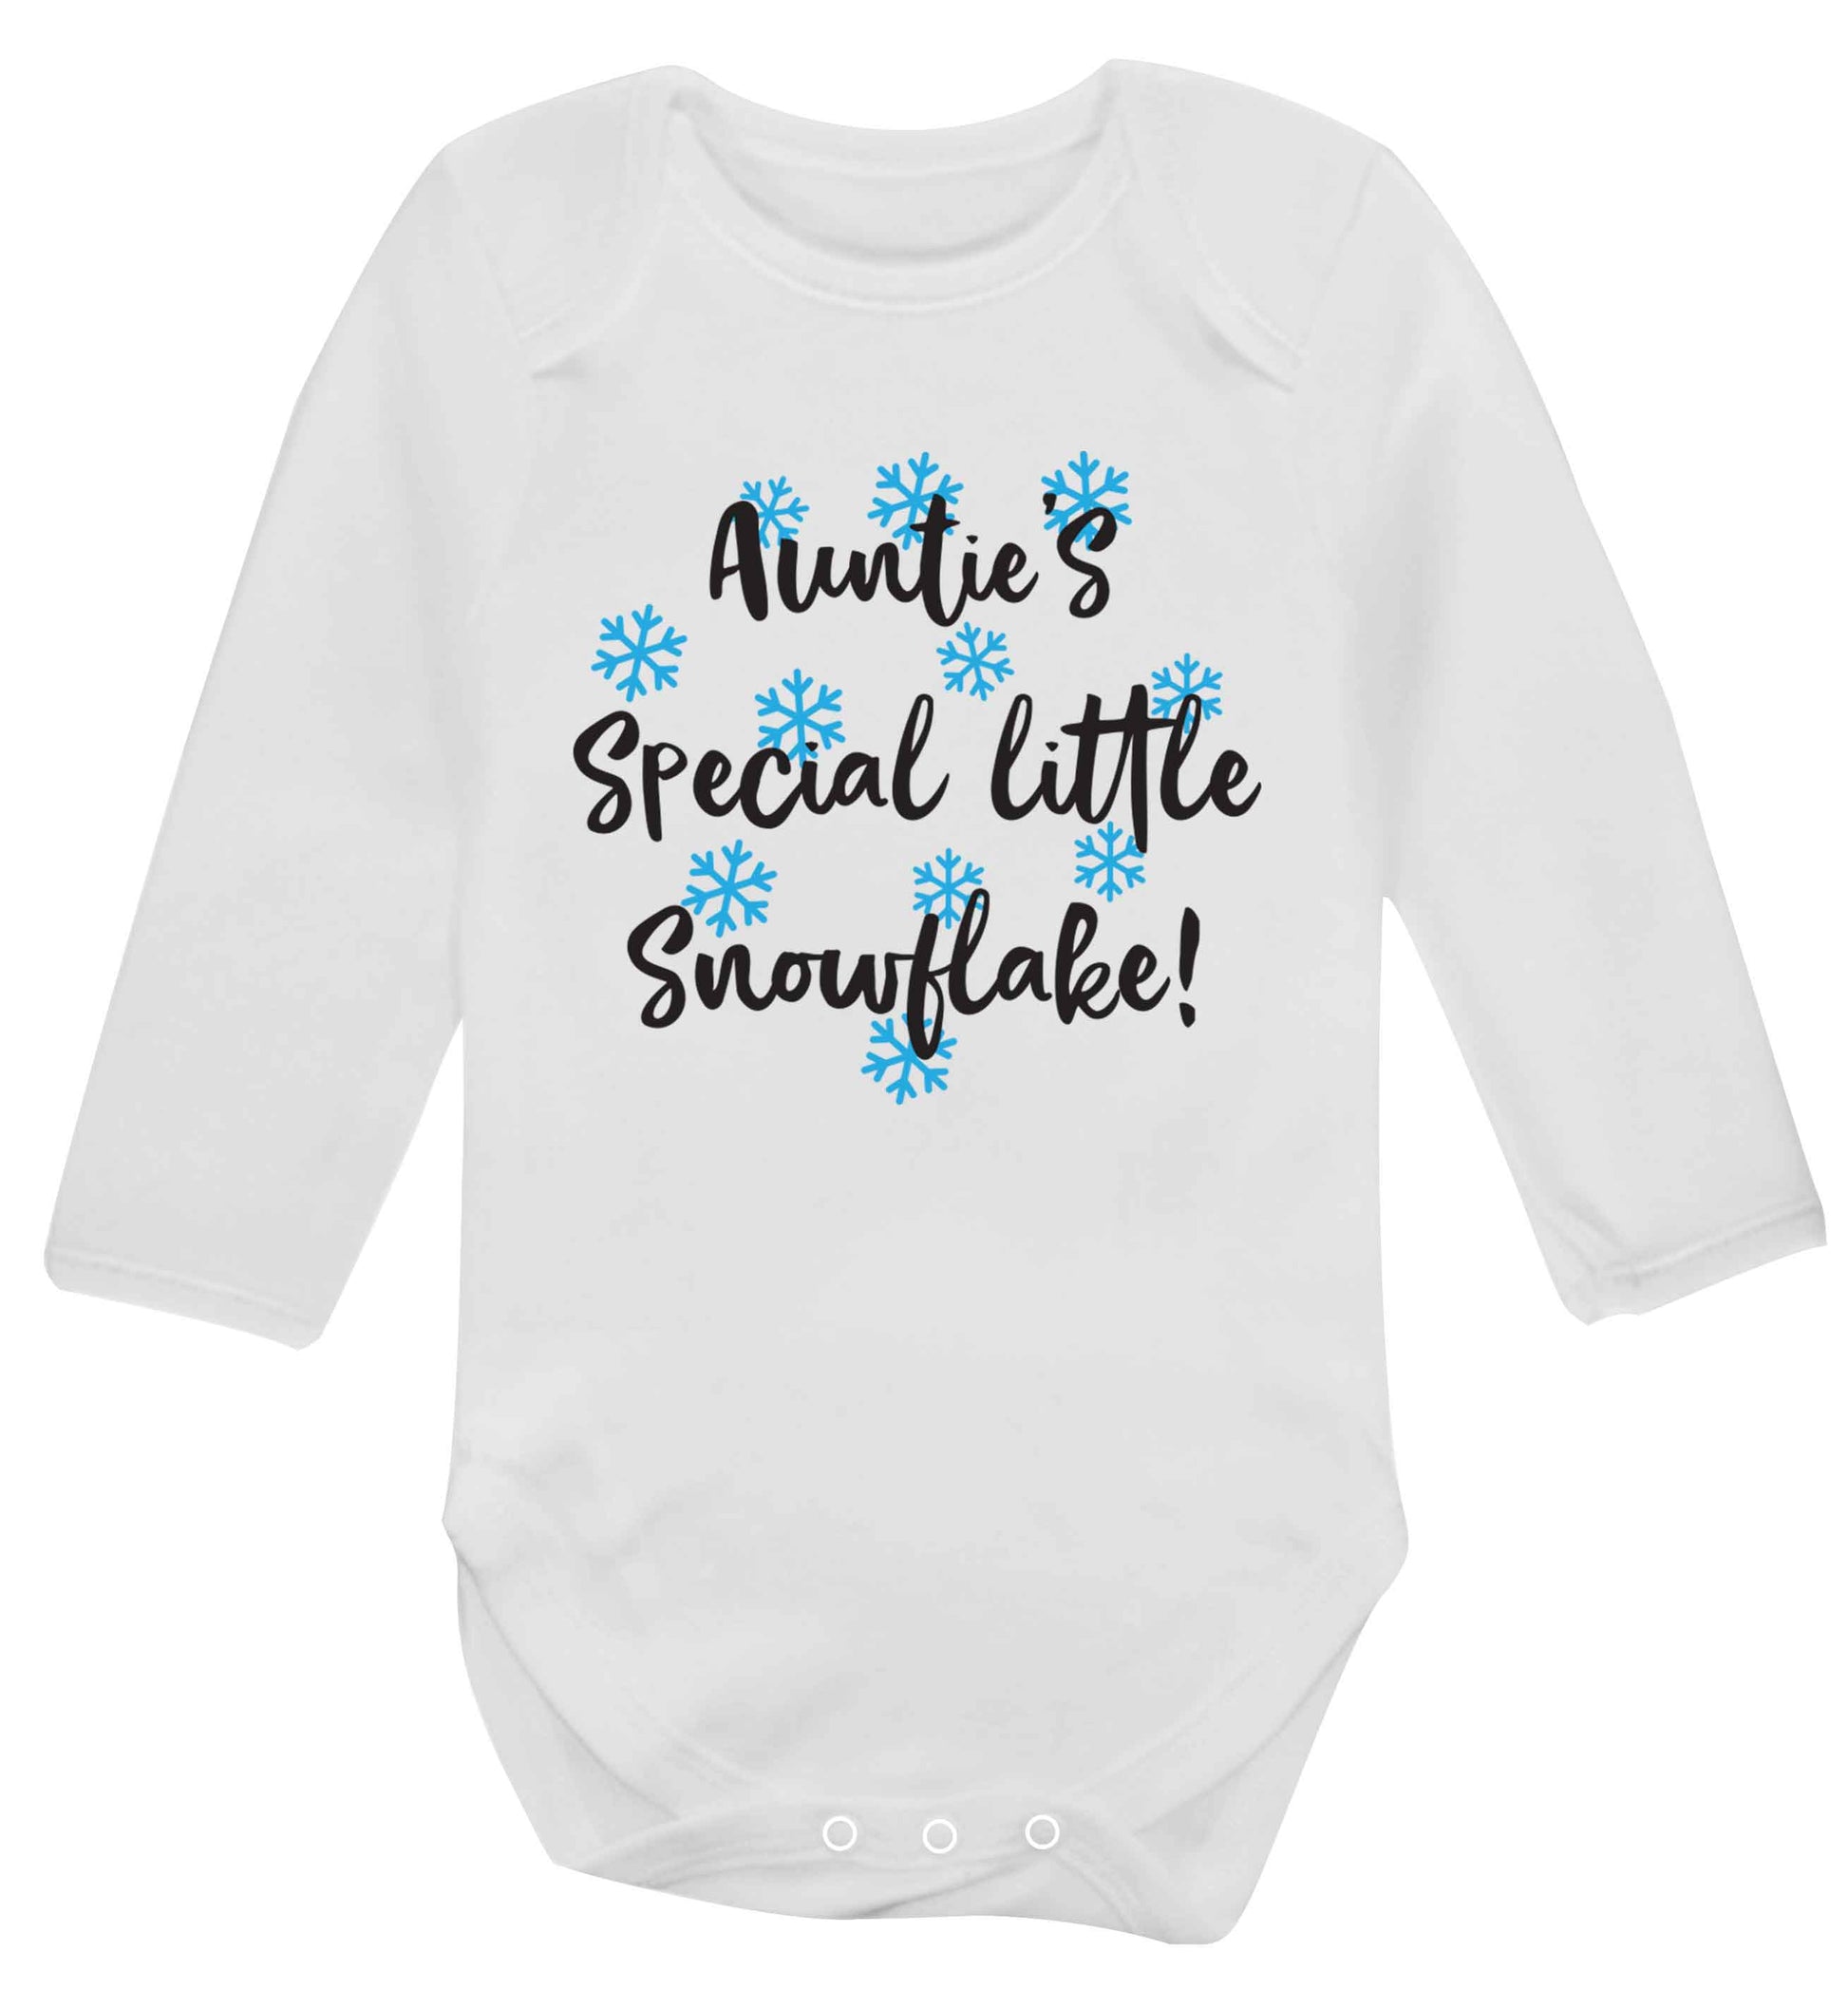 Auntie's special little snowflake Baby Vest long sleeved white 6-12 months